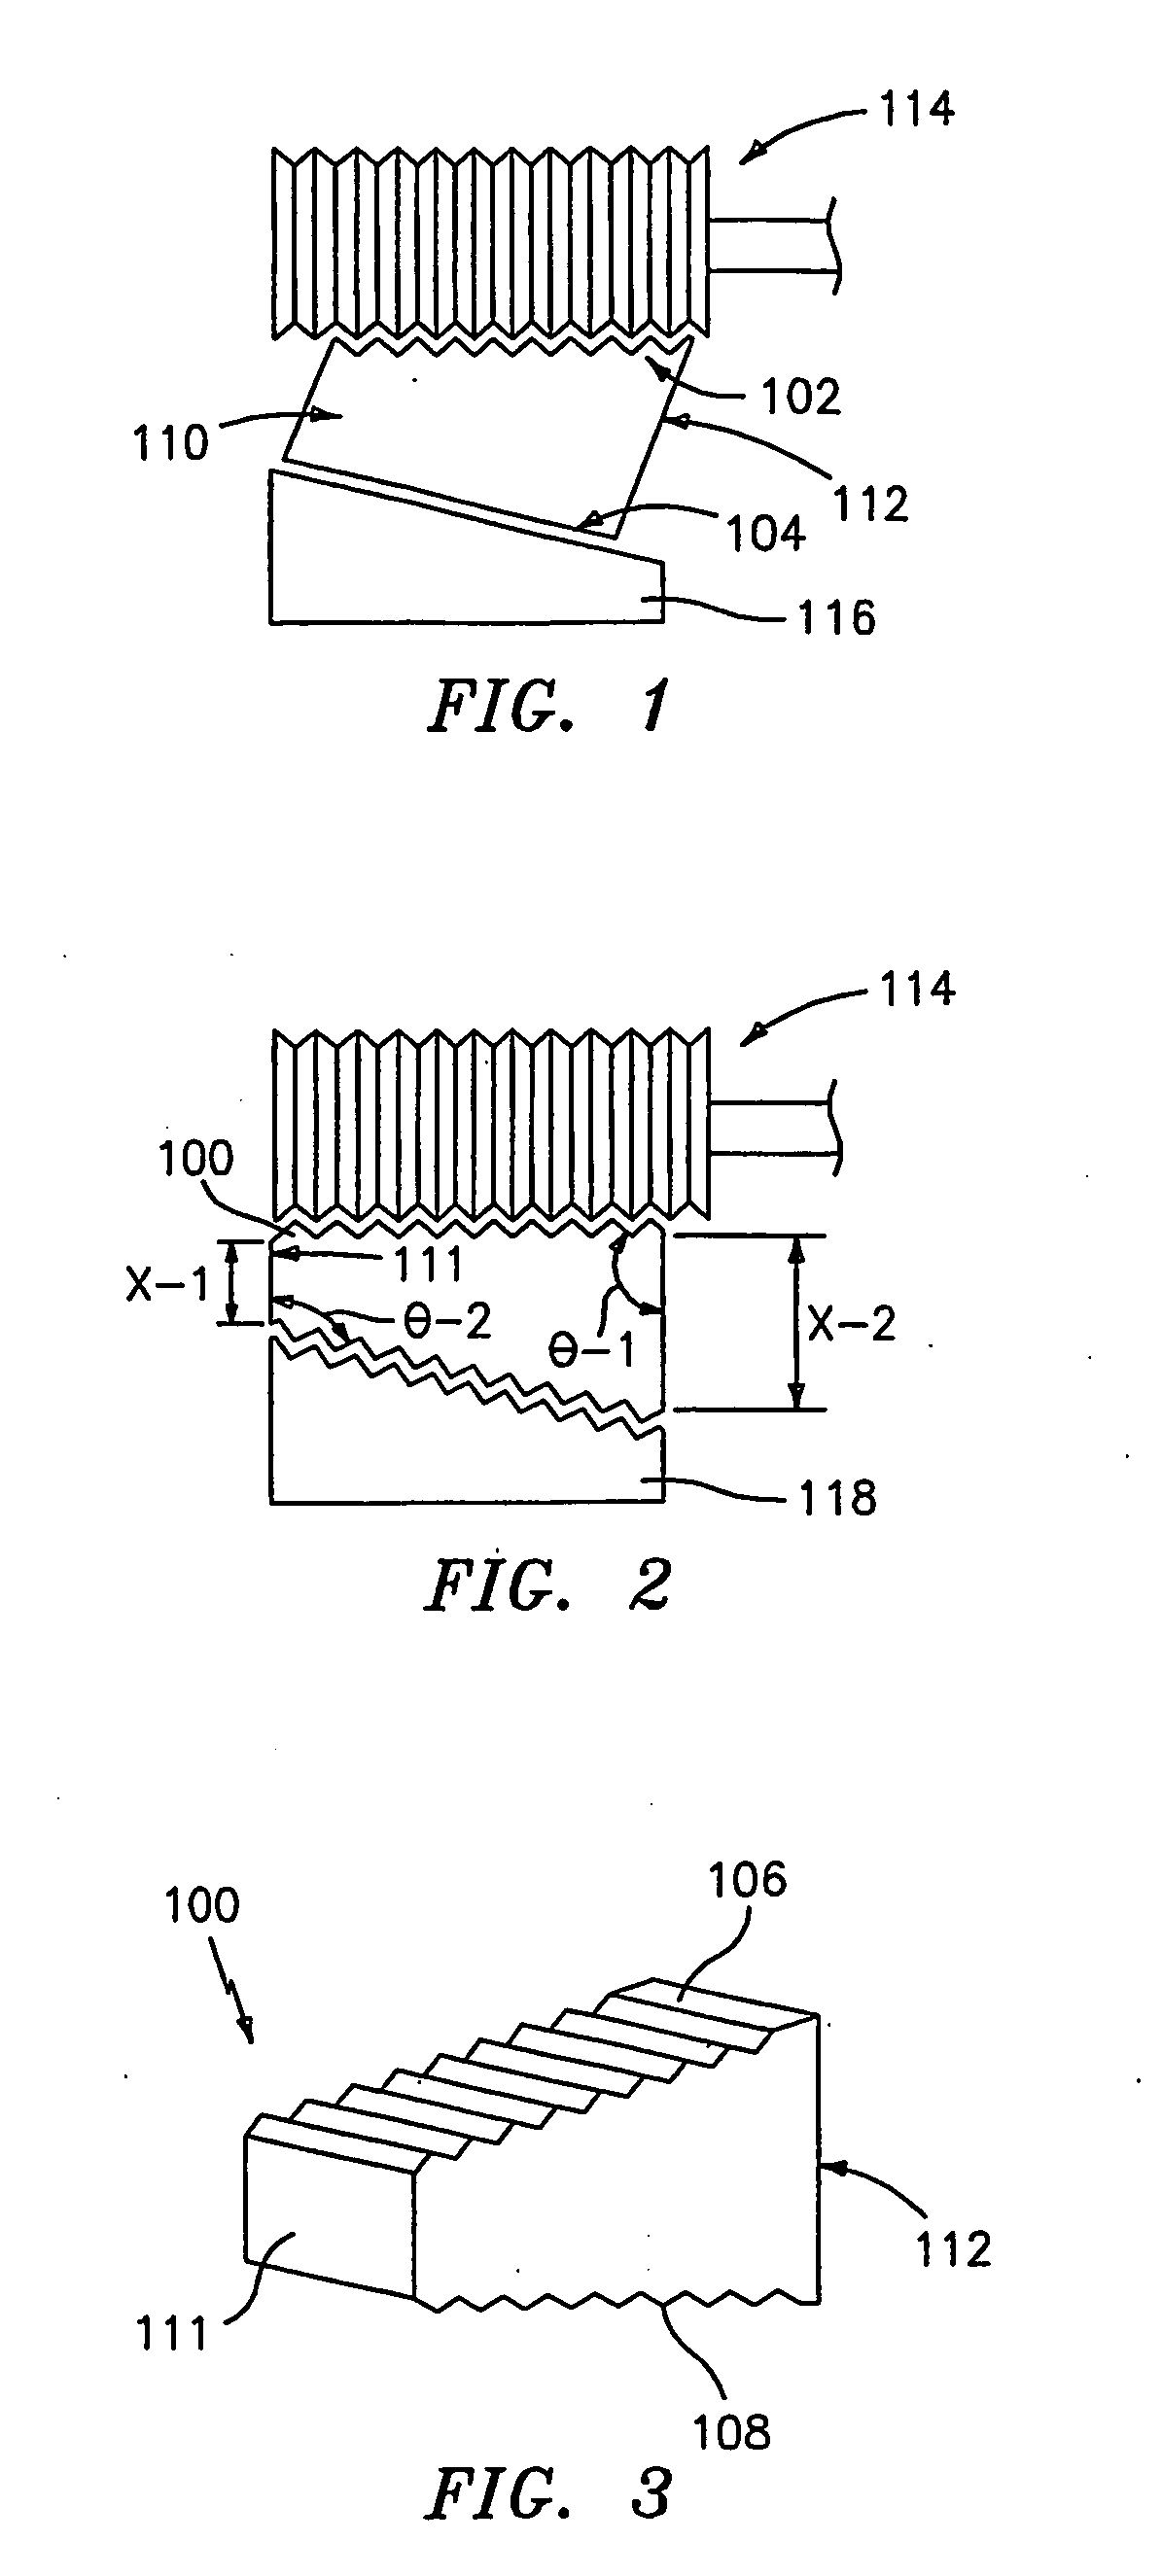 Method and apparatus for machining a surgical implant